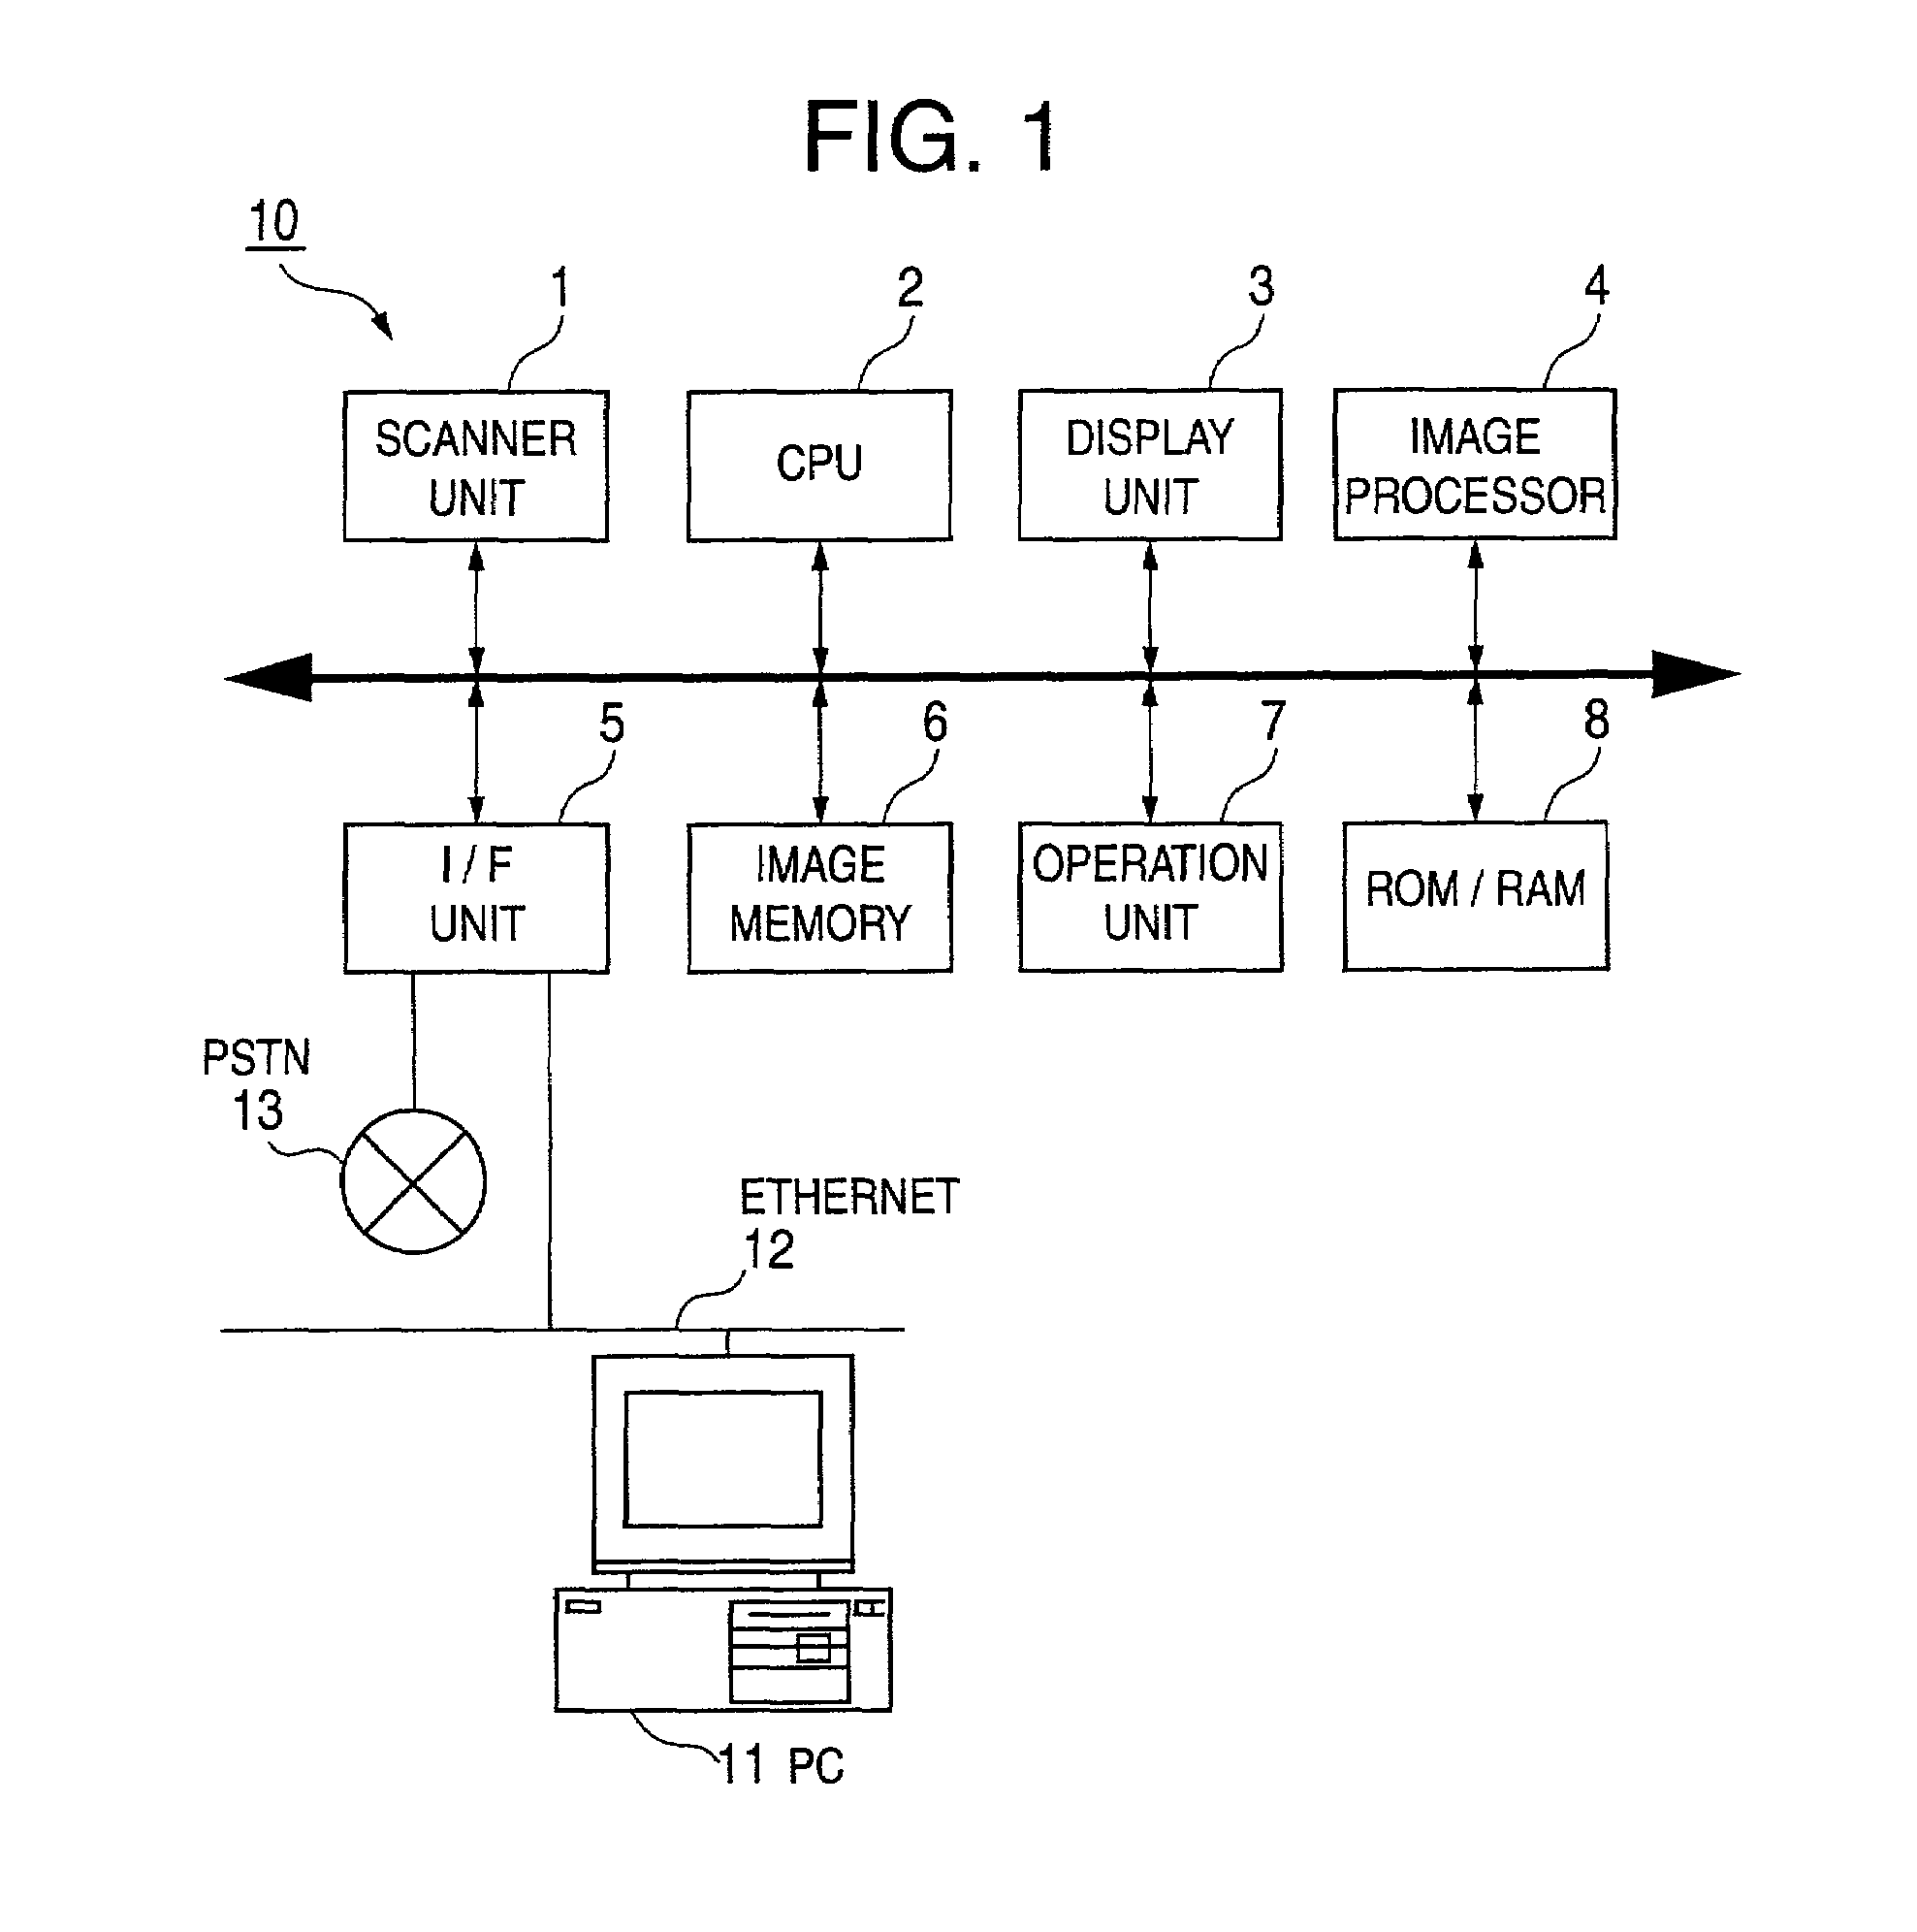 Image processing device, image processing method and remote-scan image processing system using the same